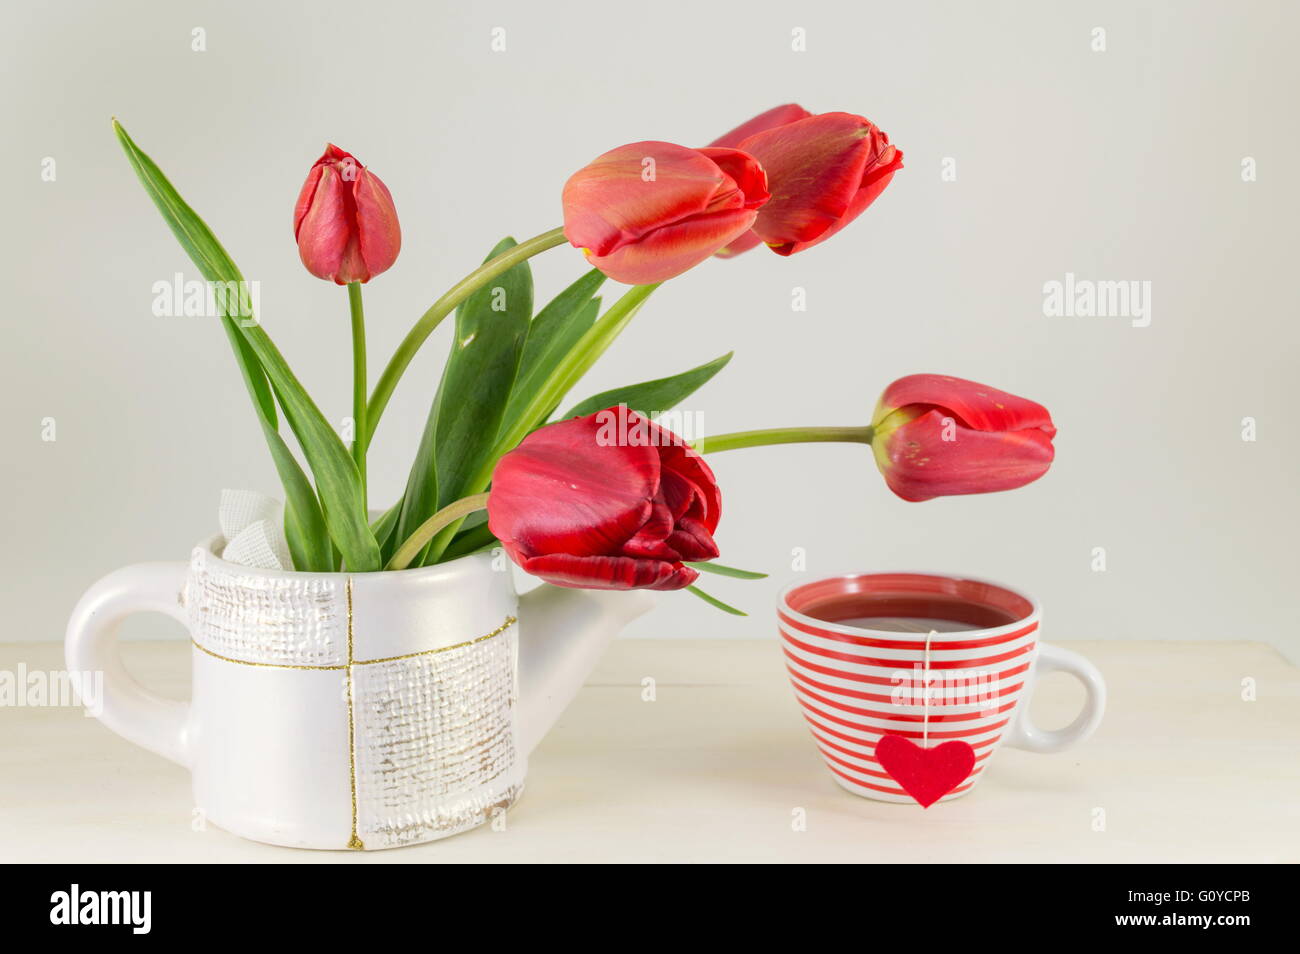 Red tulips with a cup of tea on a wooden table Stock Photo